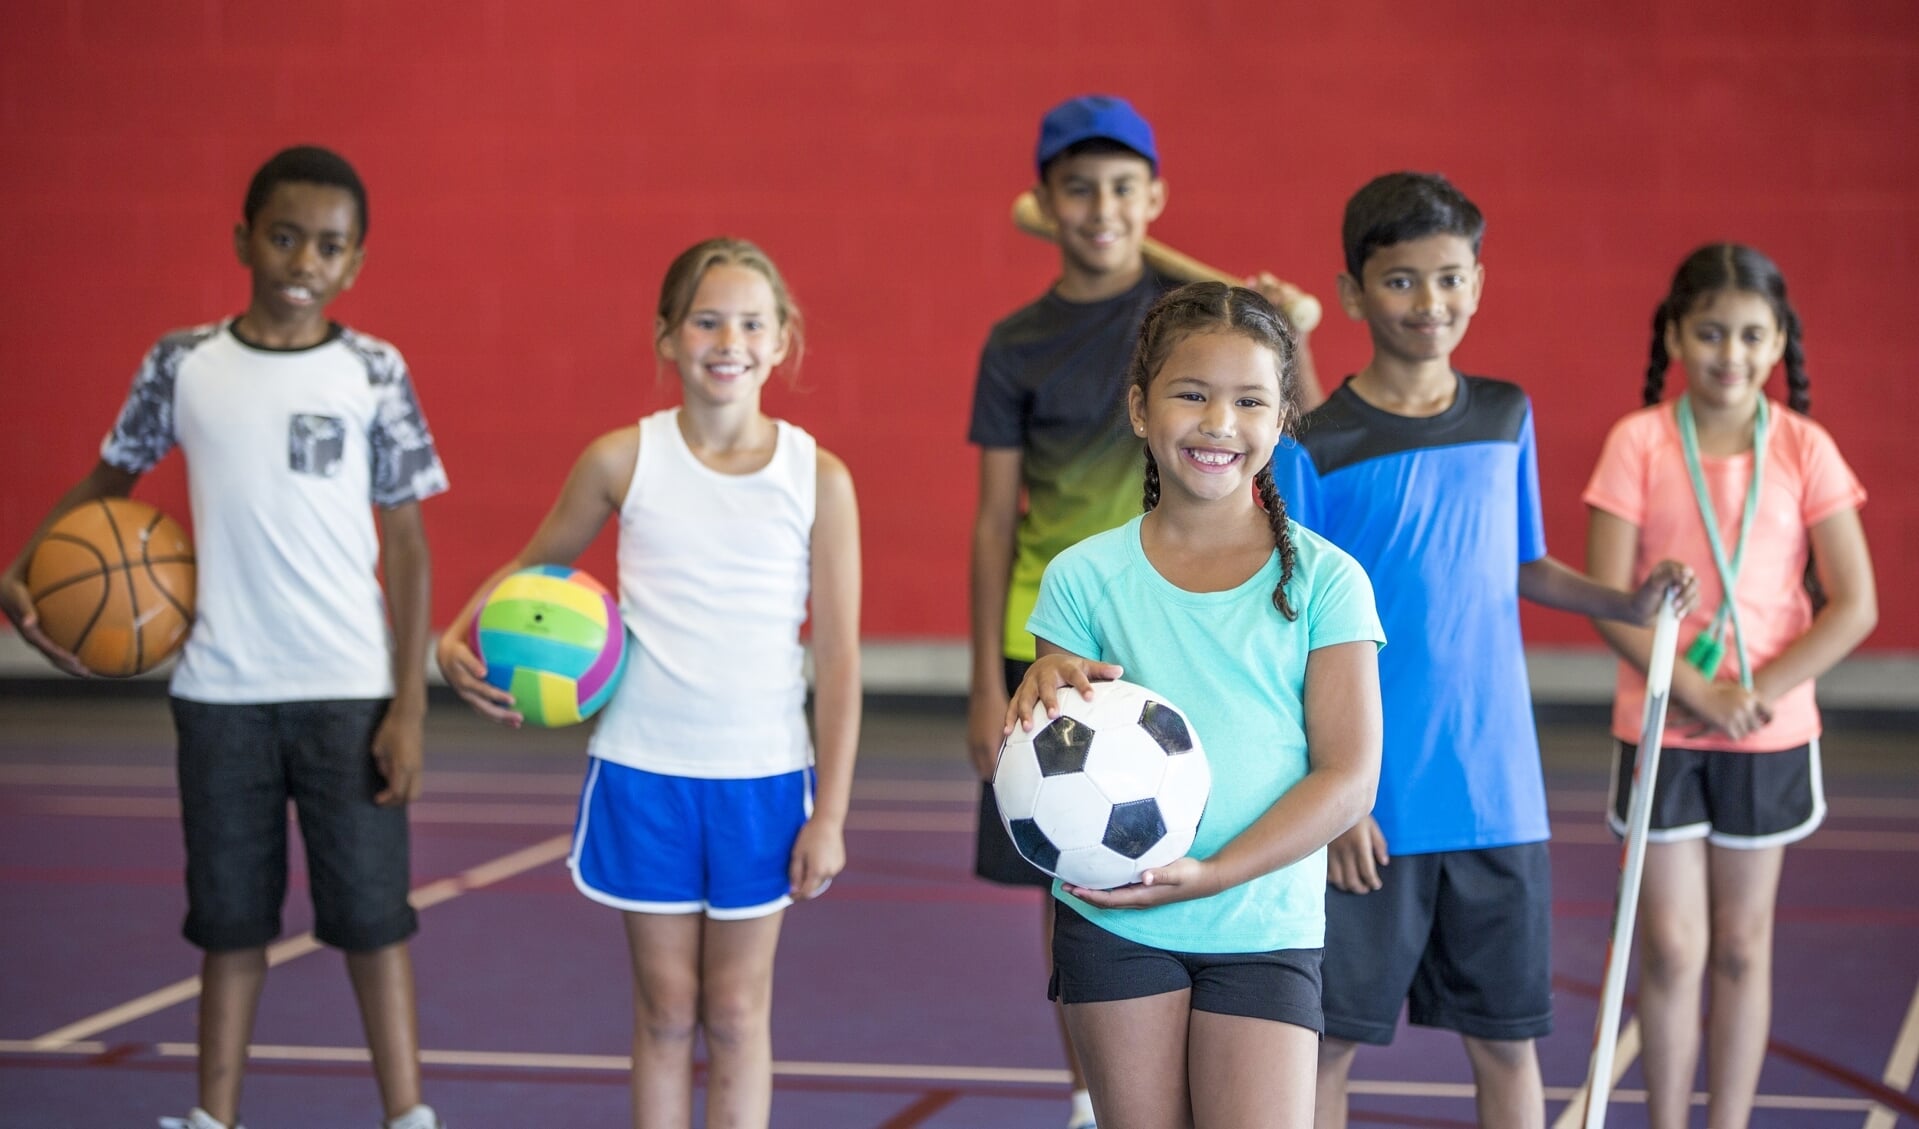 A multi-ethnic group of elementary age children  are playing various sports together in the gym. They are holding a basketball, soccerball, volleyball, and a hockey stick.